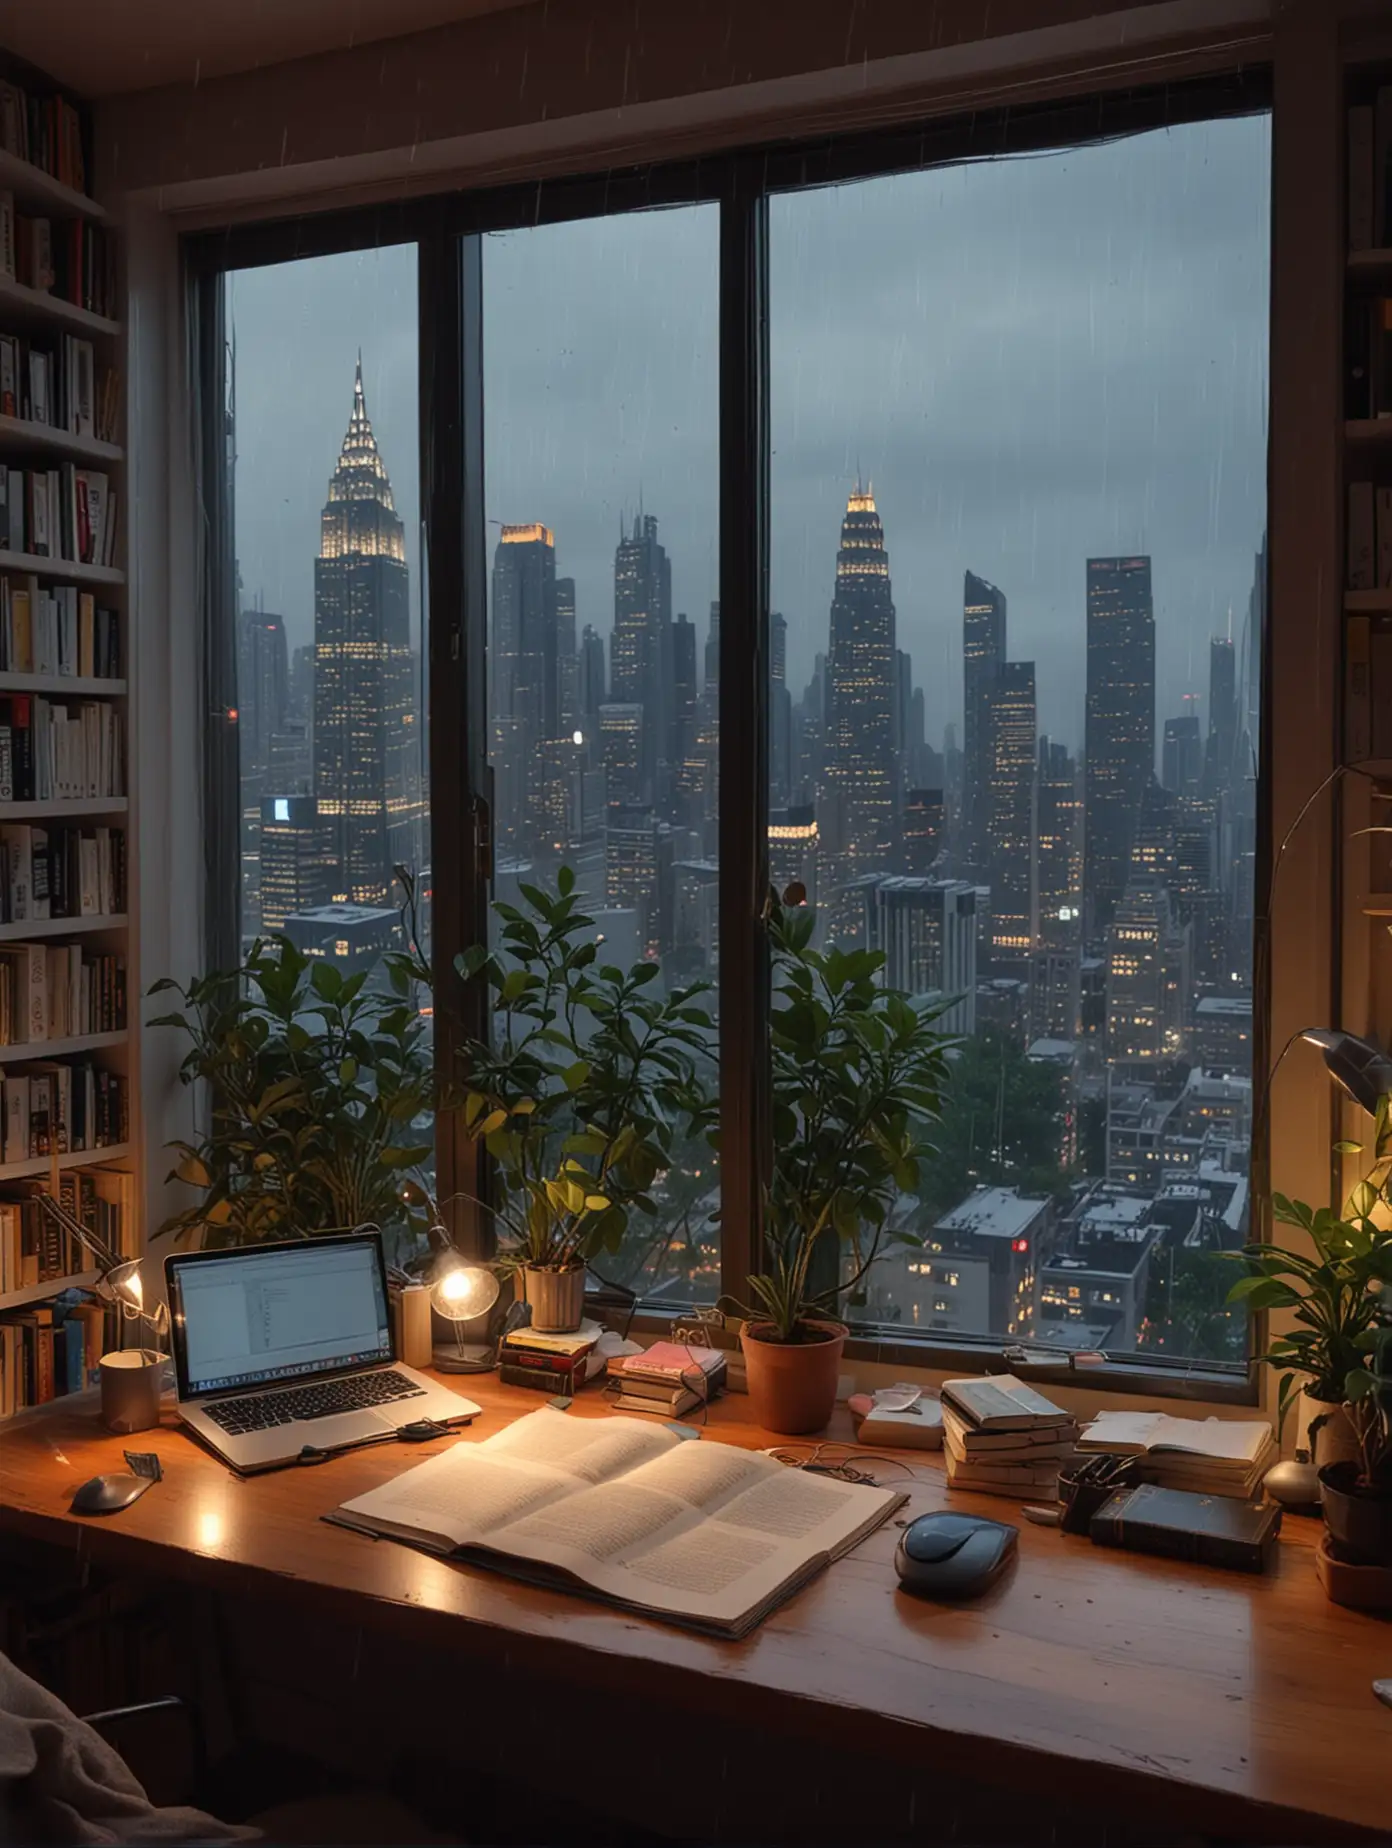 Cozy Dusk Study Room with Cityscape View and Rain Outside